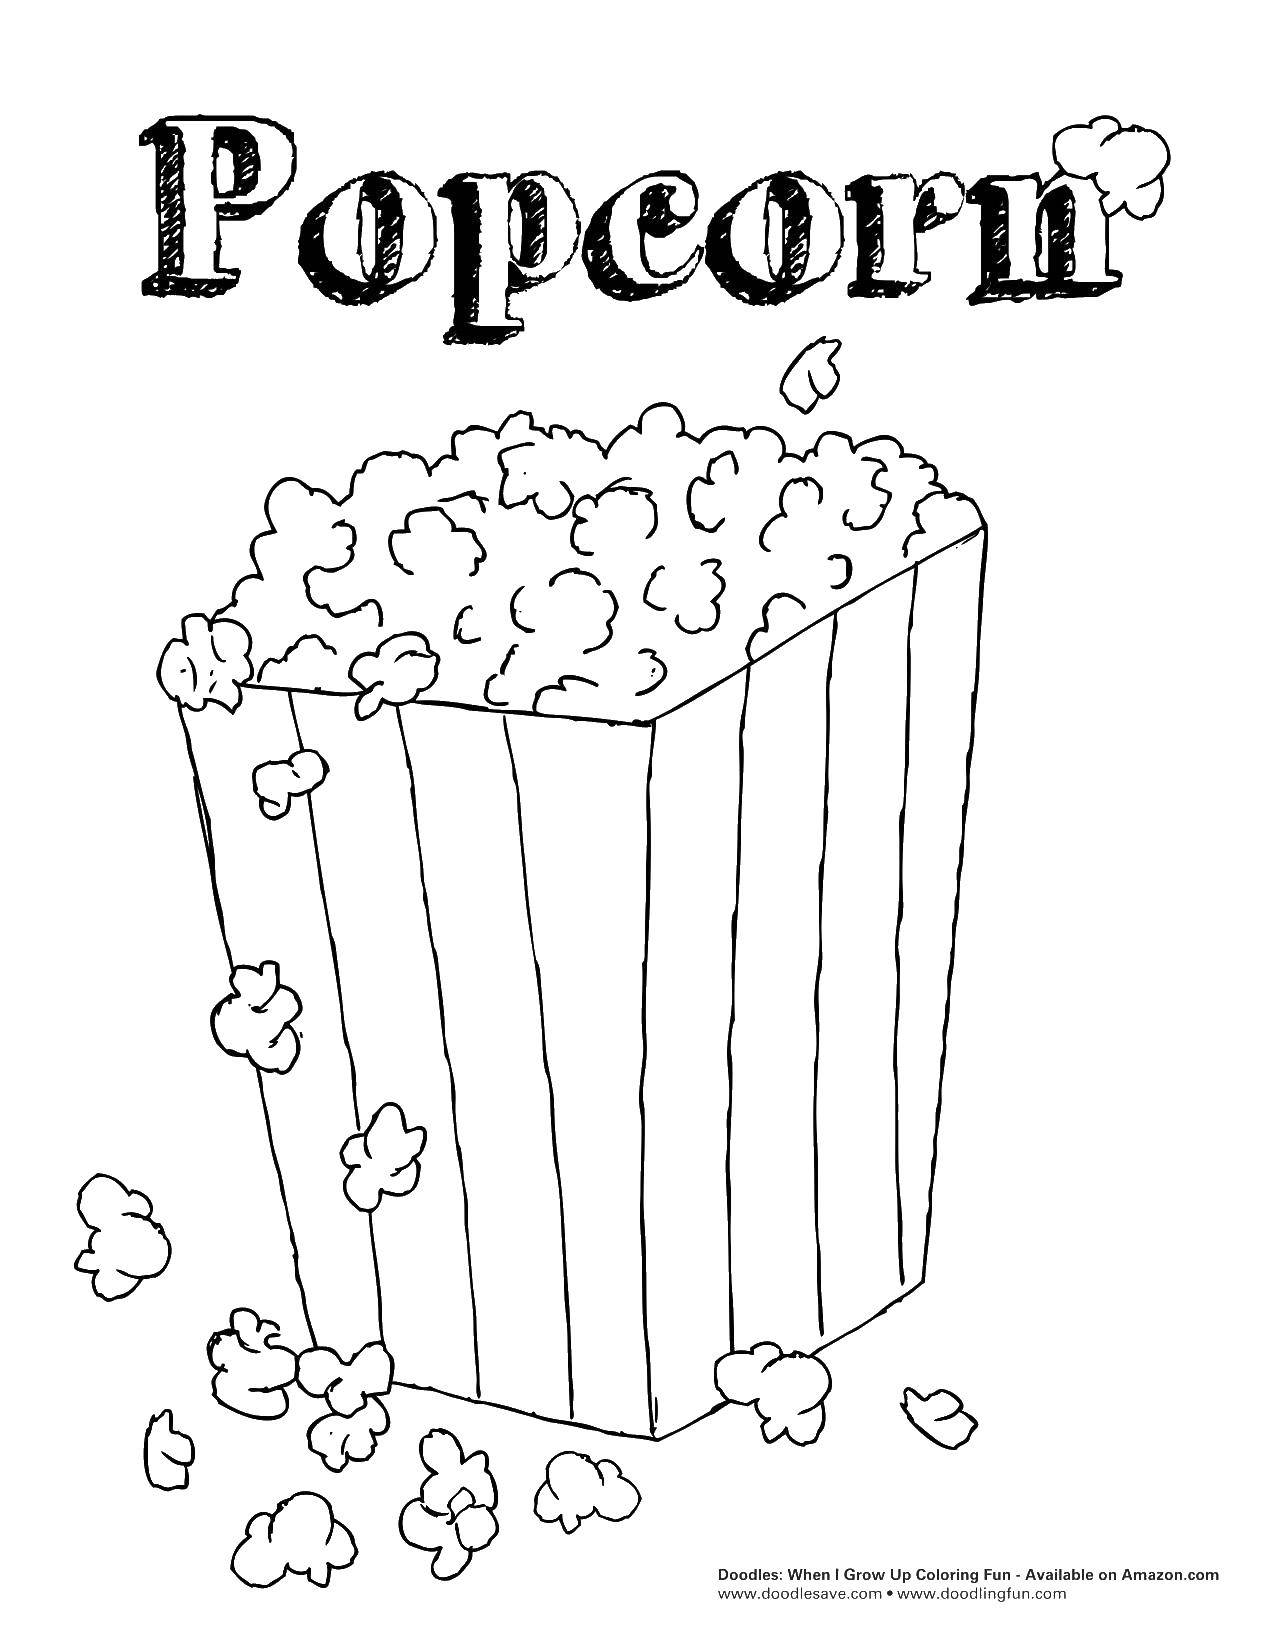 Coloring Popcorn.. Category The food. Tags:  food, popcorn.